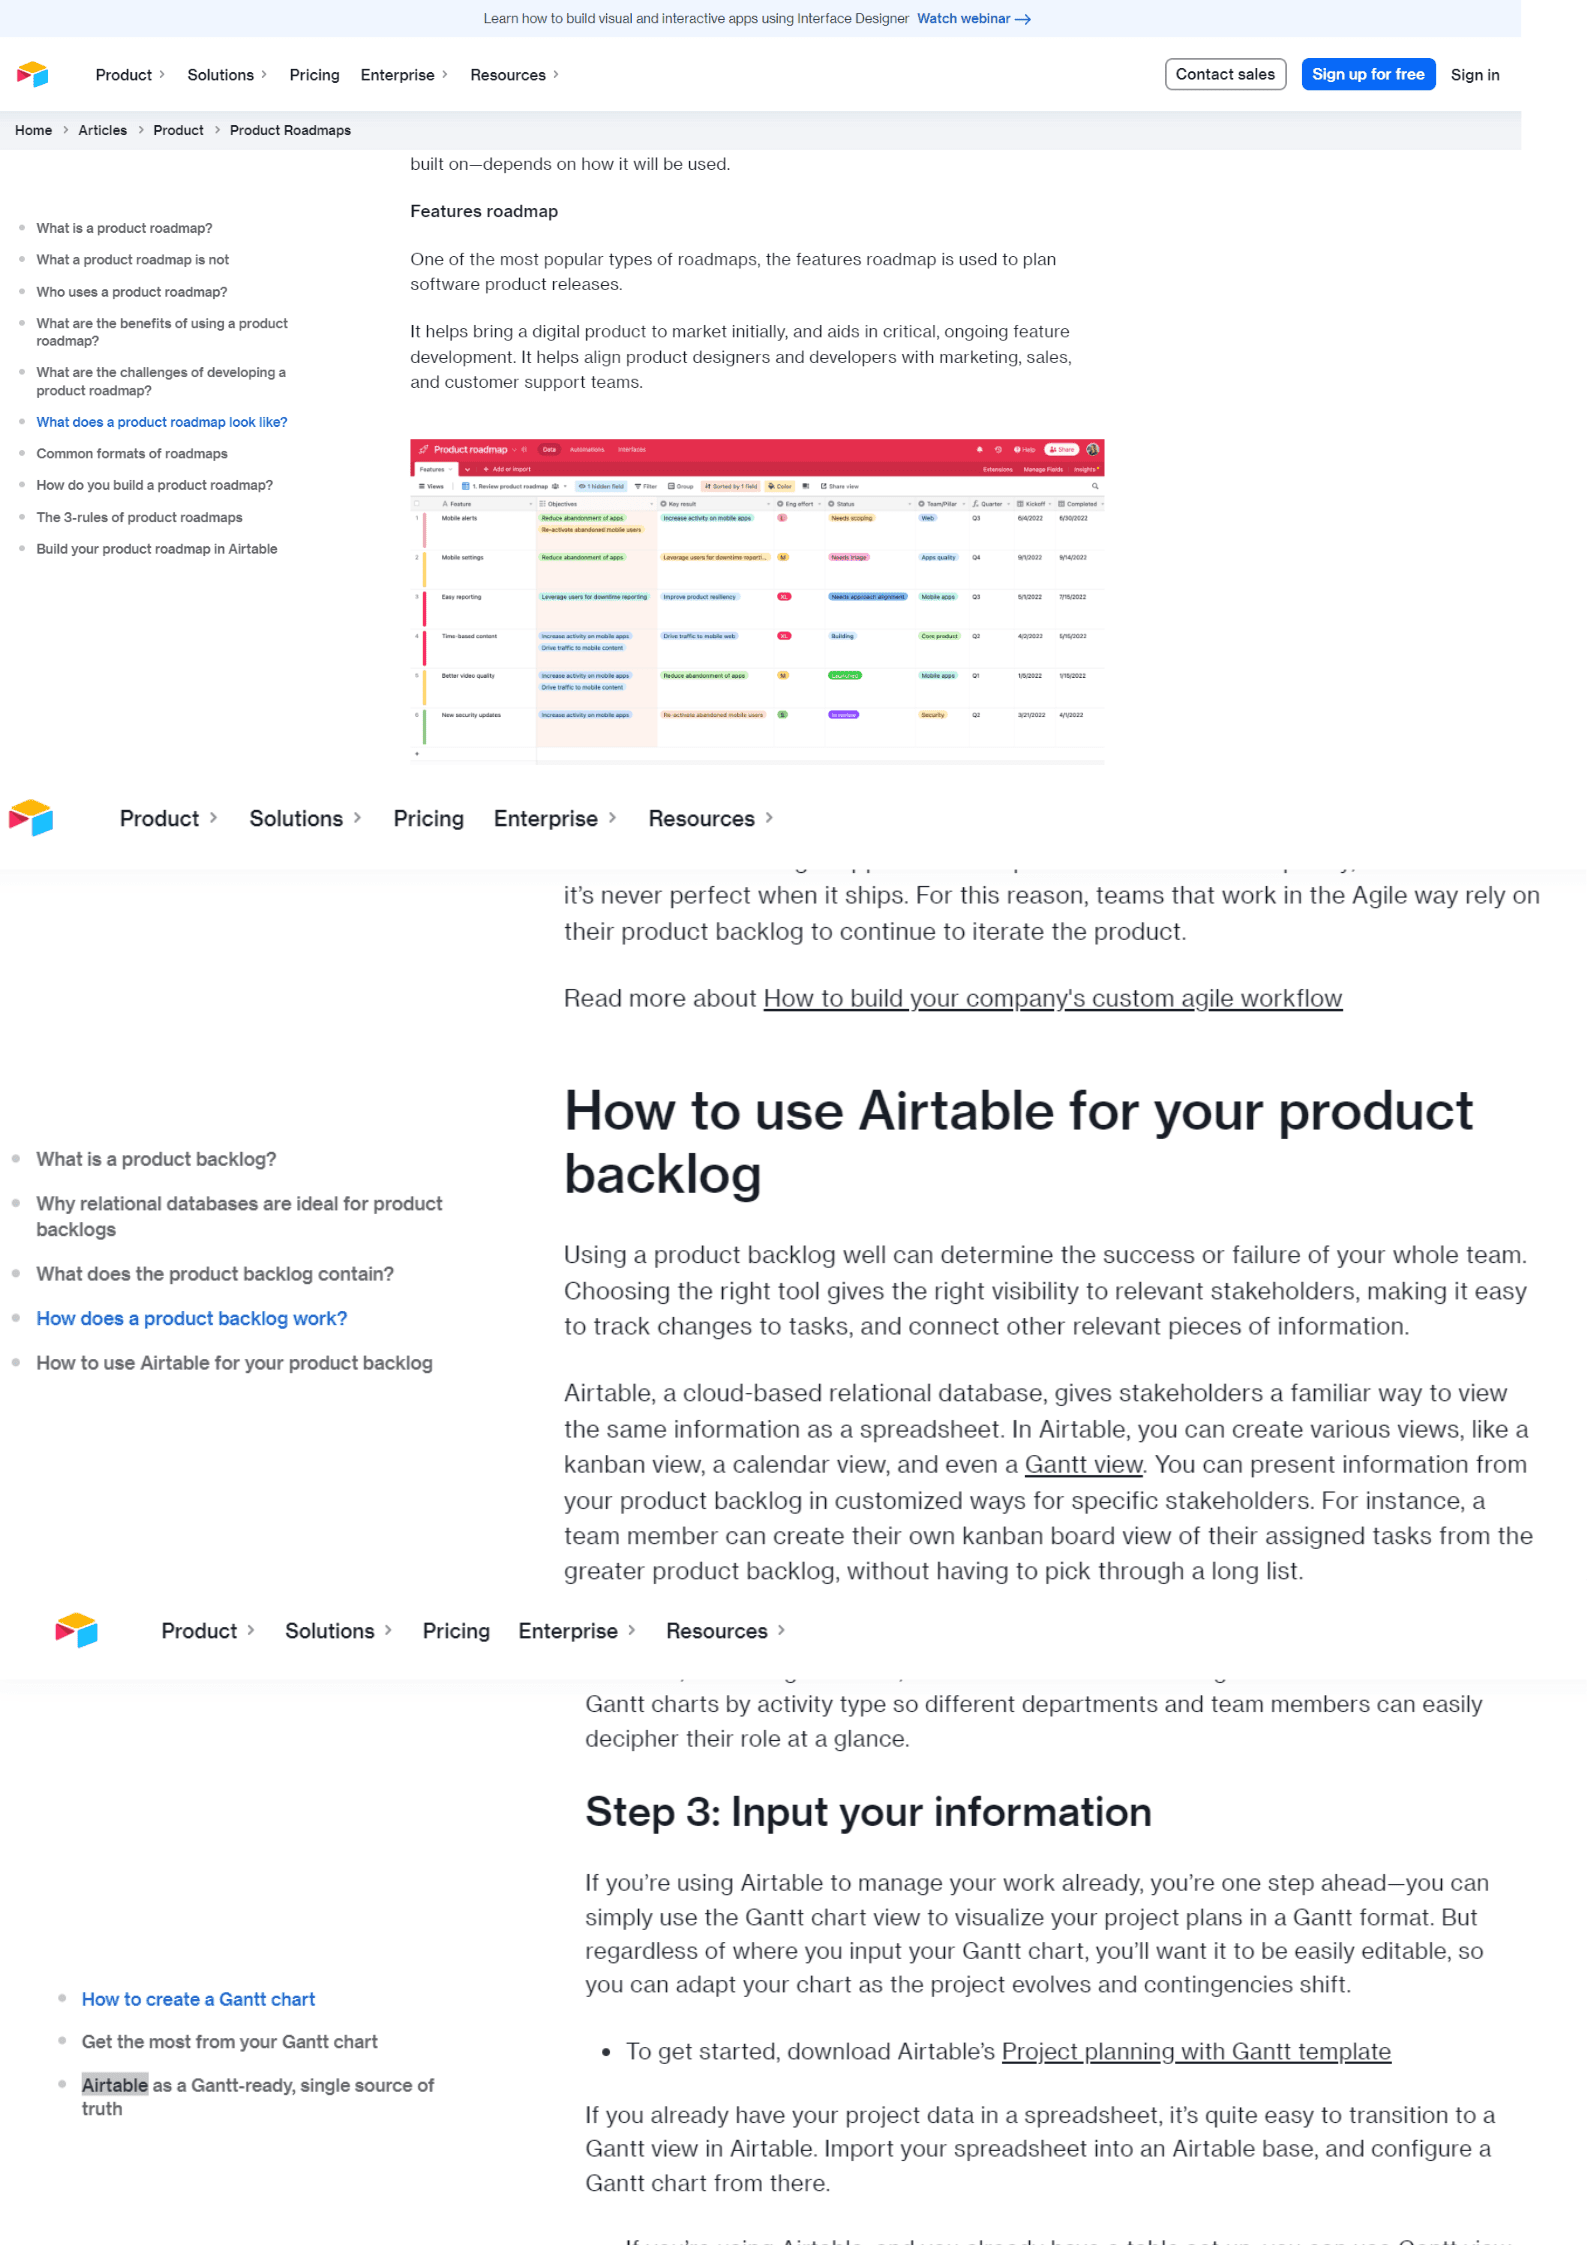 Content marketing case study - Airtable articles example